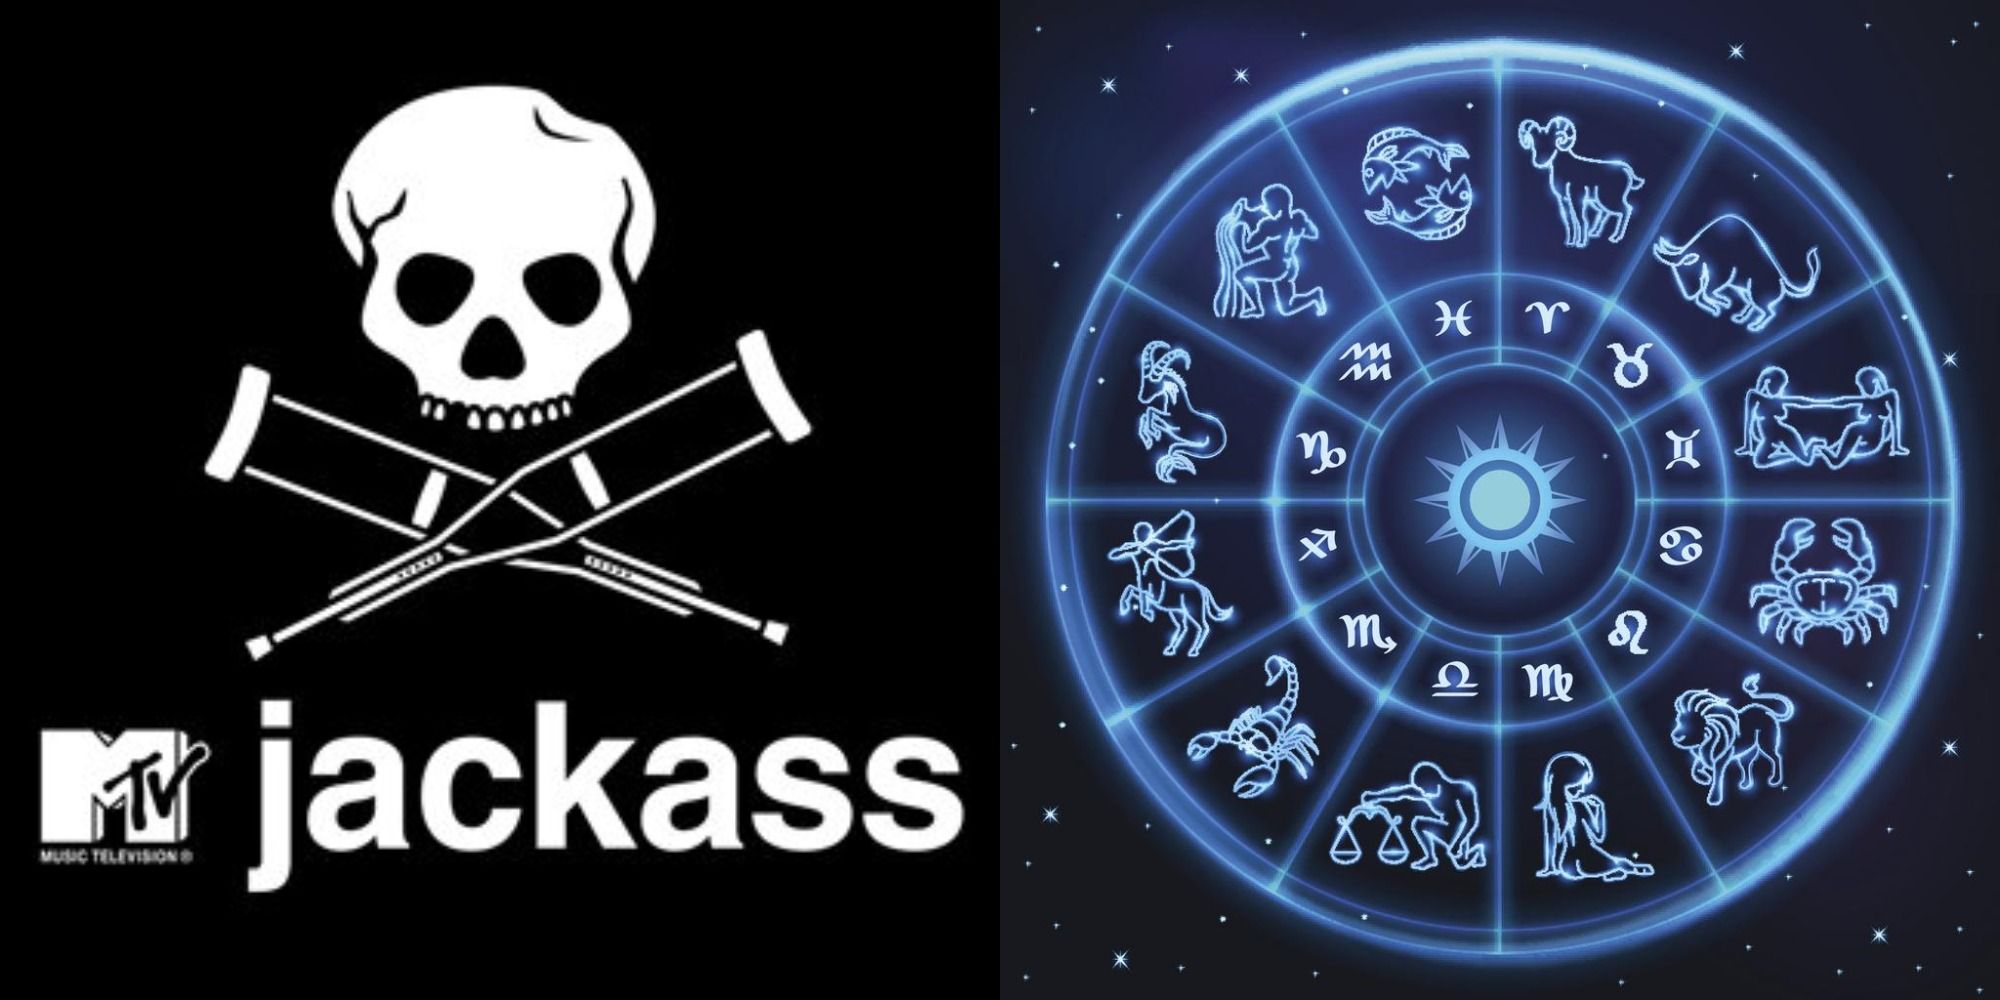 Split image showing the logo from the MTV show Jackass and a zodiac sign